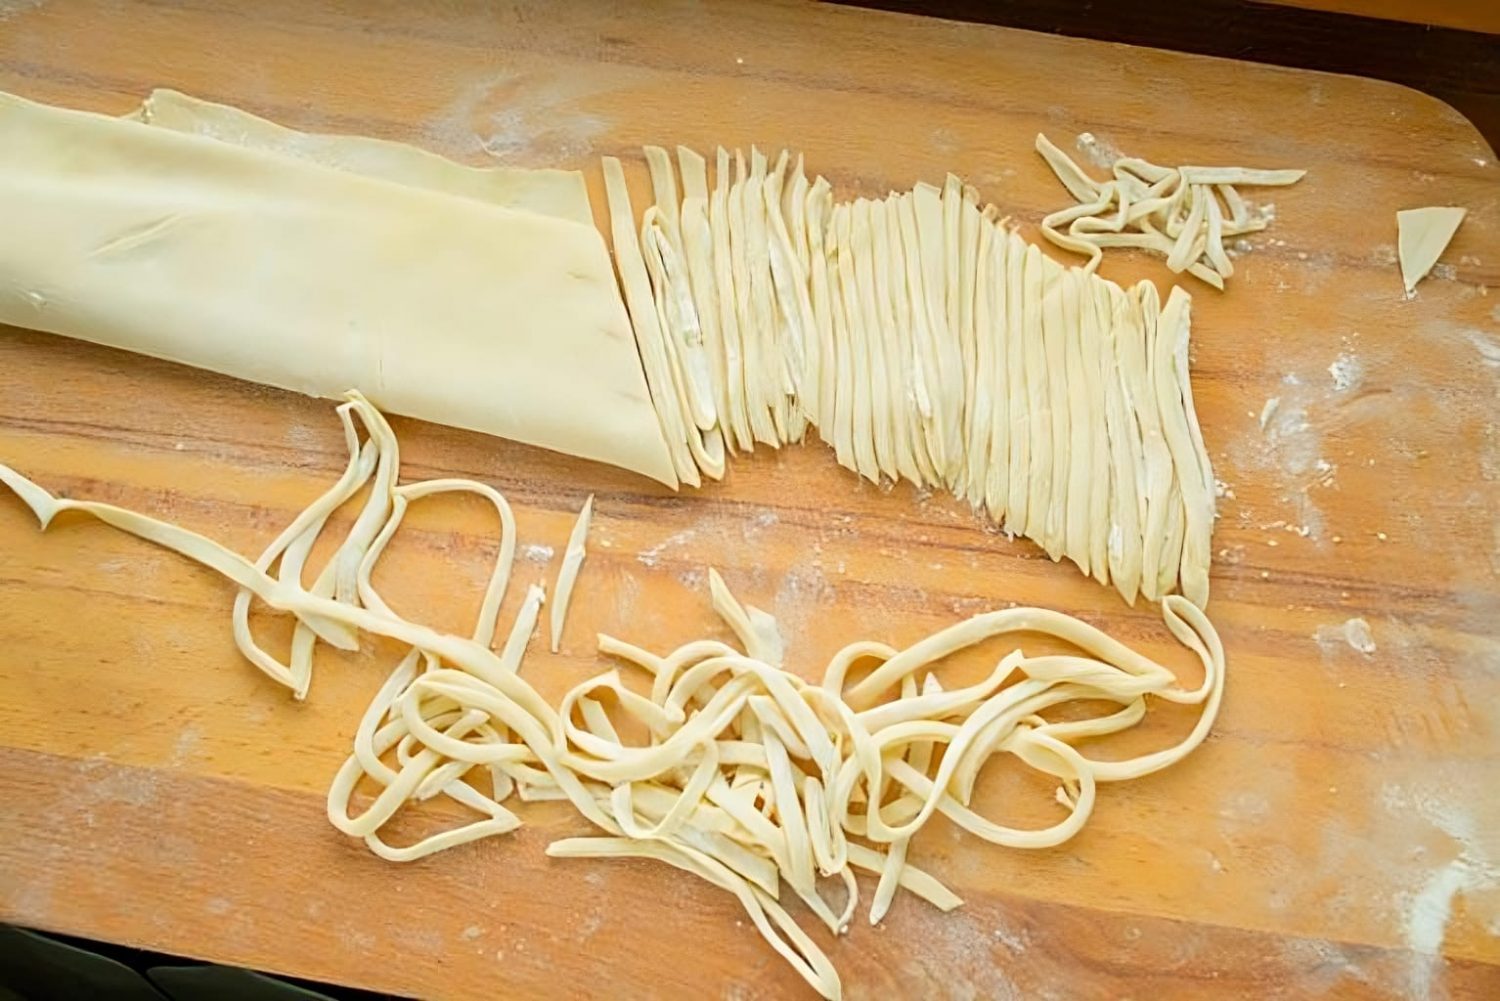 How to Make Perfect Homemade Noodles with 3 Ingredients